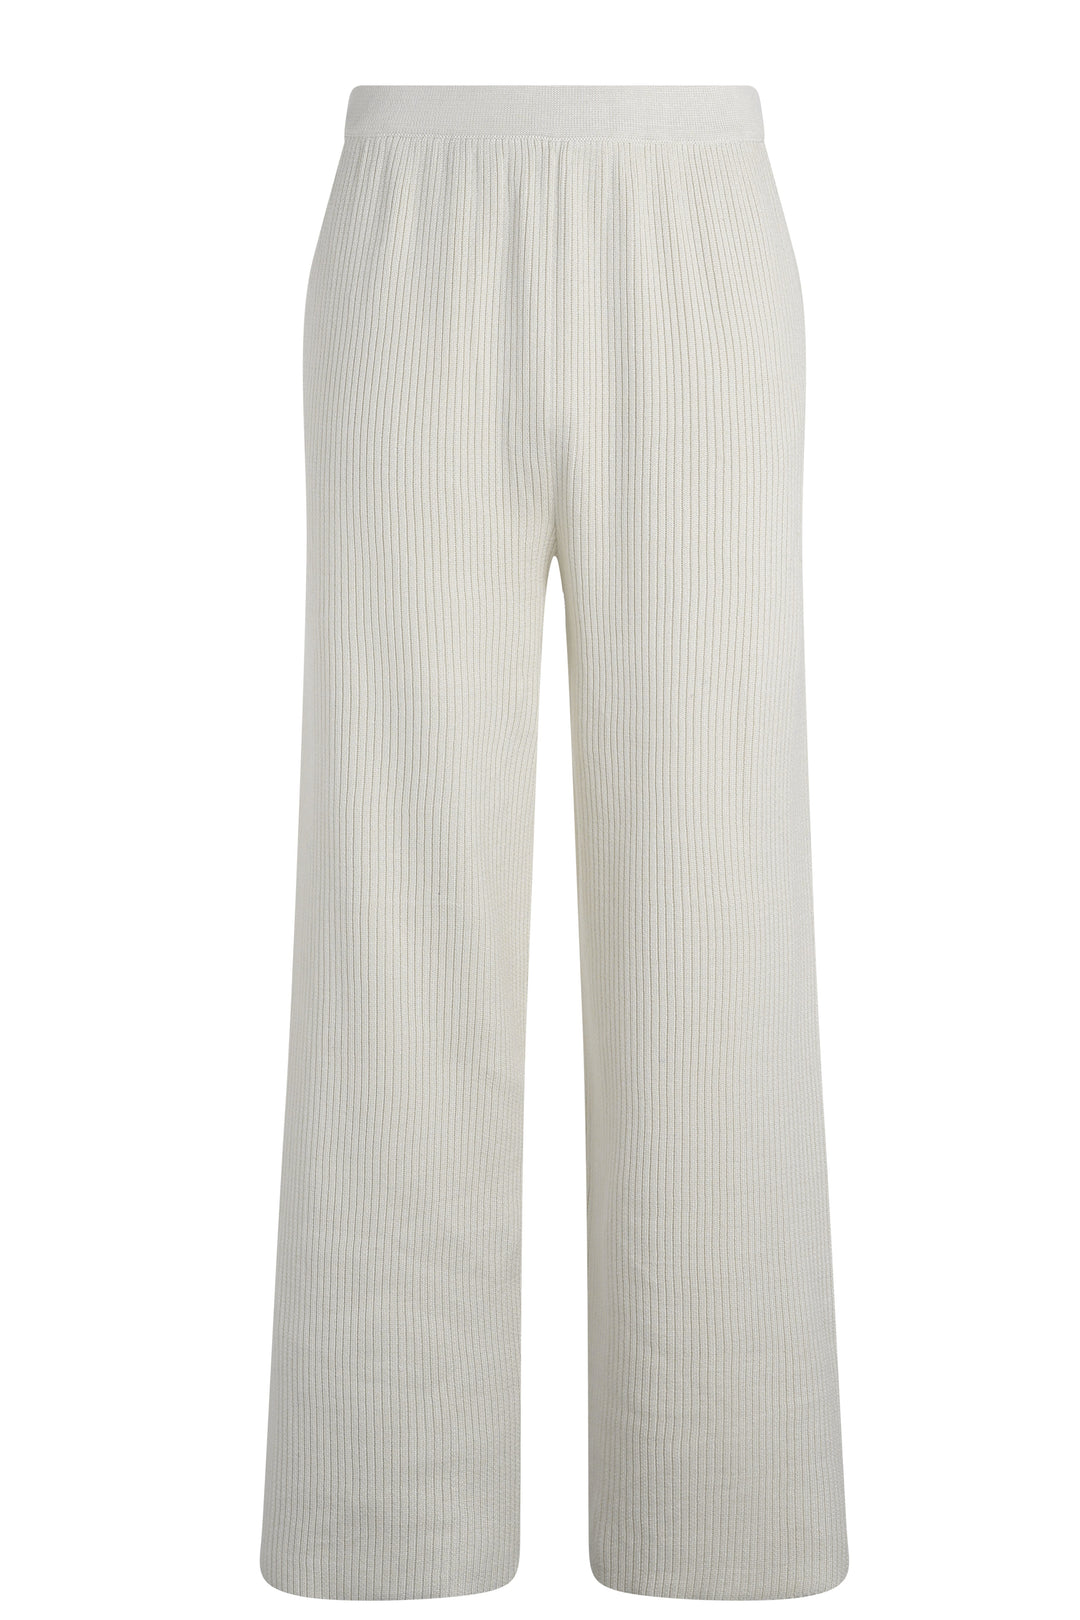 The Knitted Ribbed Pants - Oat